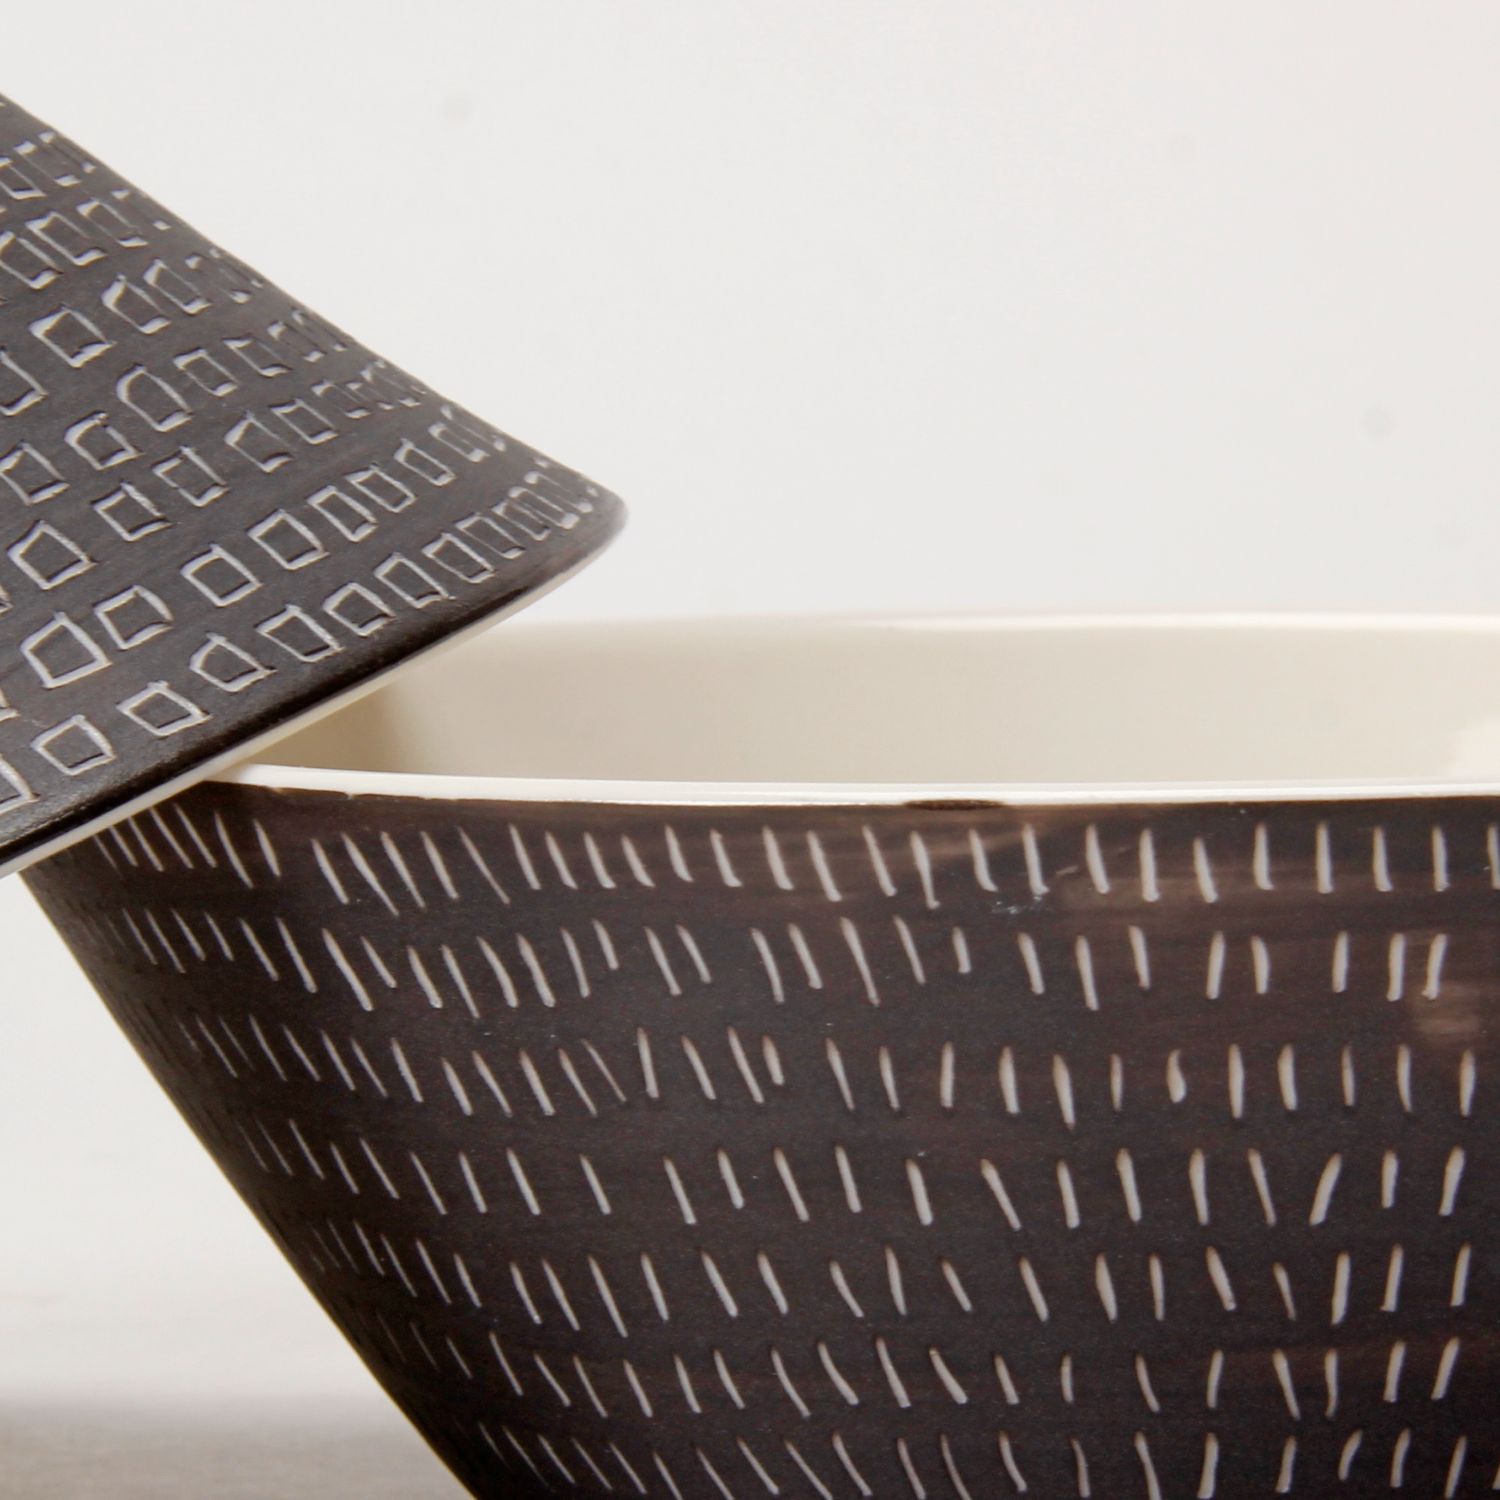 Cuir Ceramics: Black and White Bowl Product Image 4 of 5